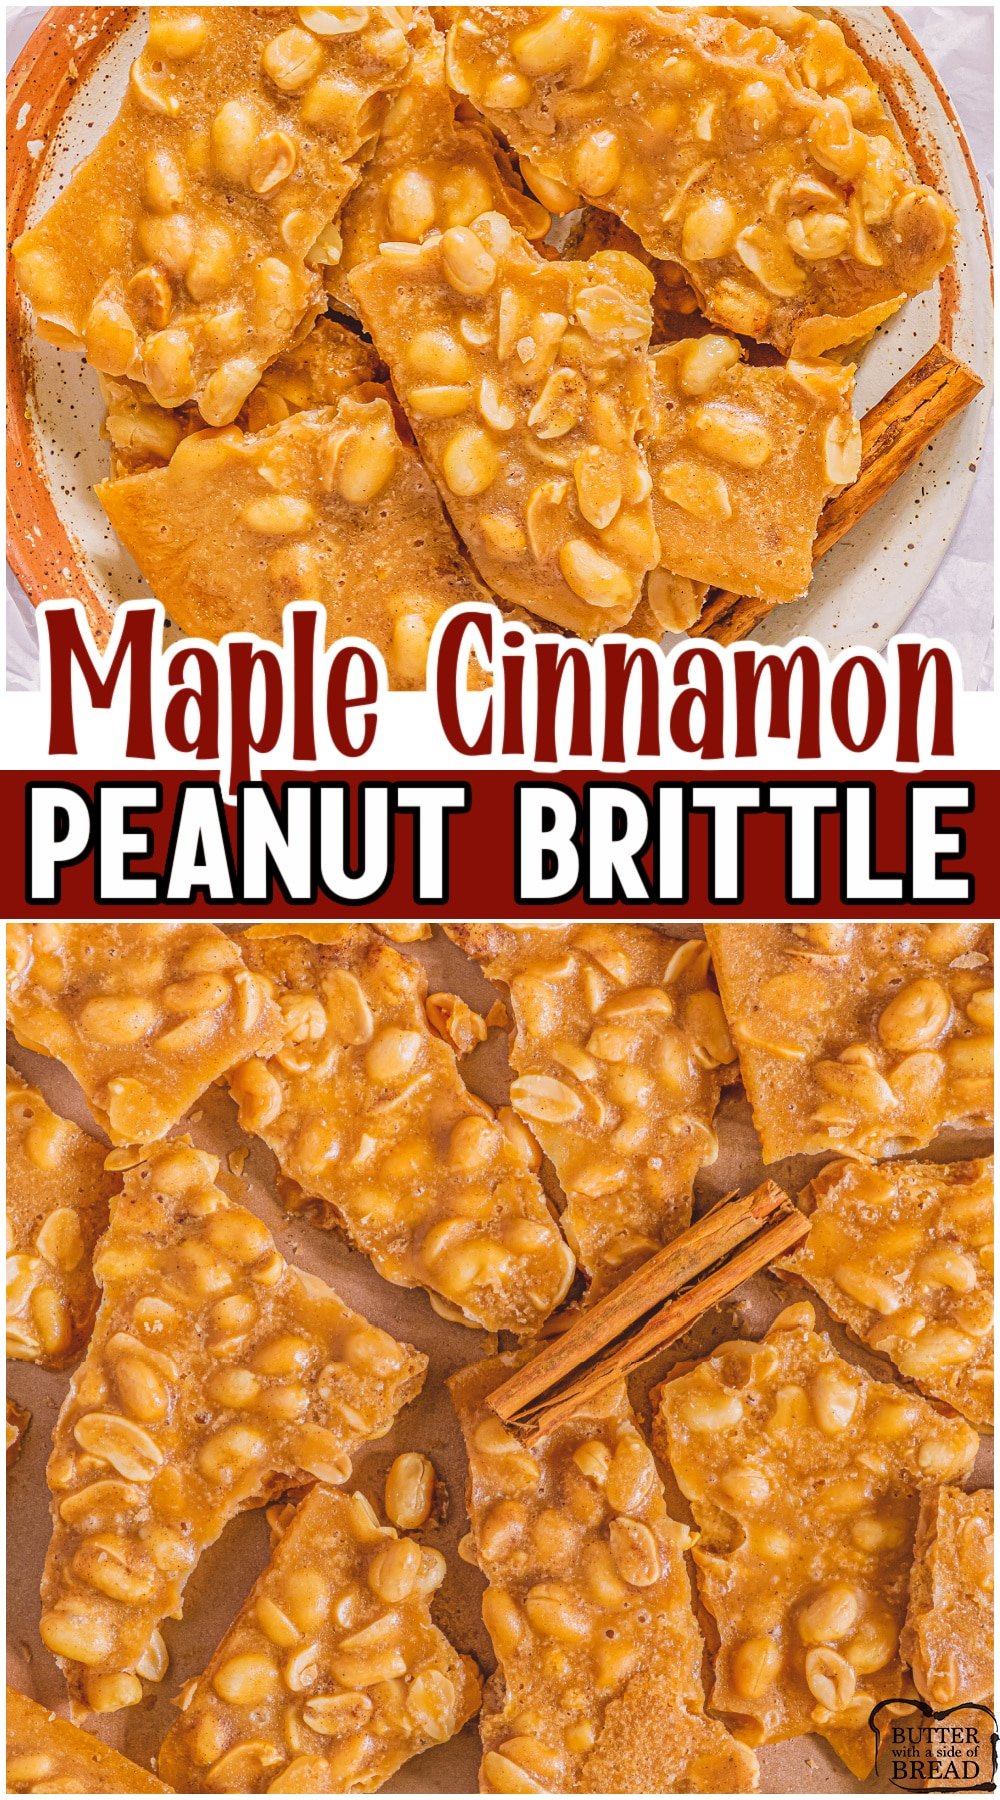 You can have homemade maple cinnamon peanut brittle in just 30 minutes with this recipe that uses maple syrup instead of corn syrup! Classic candy with lovely maple cinnamon flavors, perfect for holiday teats & gift giving.